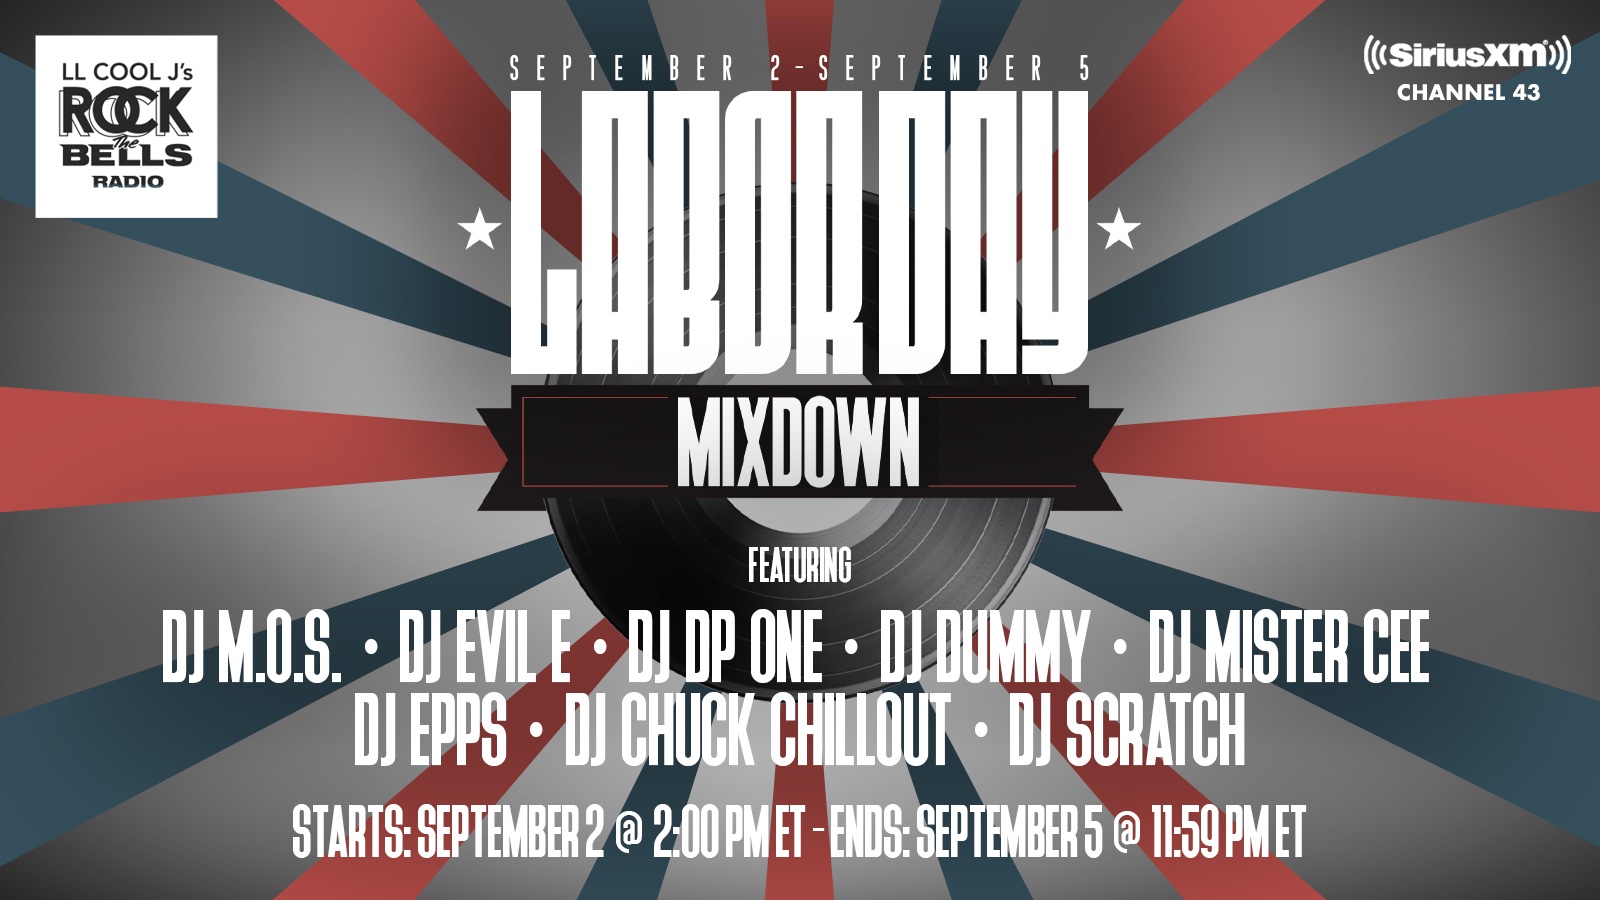 Rock The Bells Labor Day Mixdown